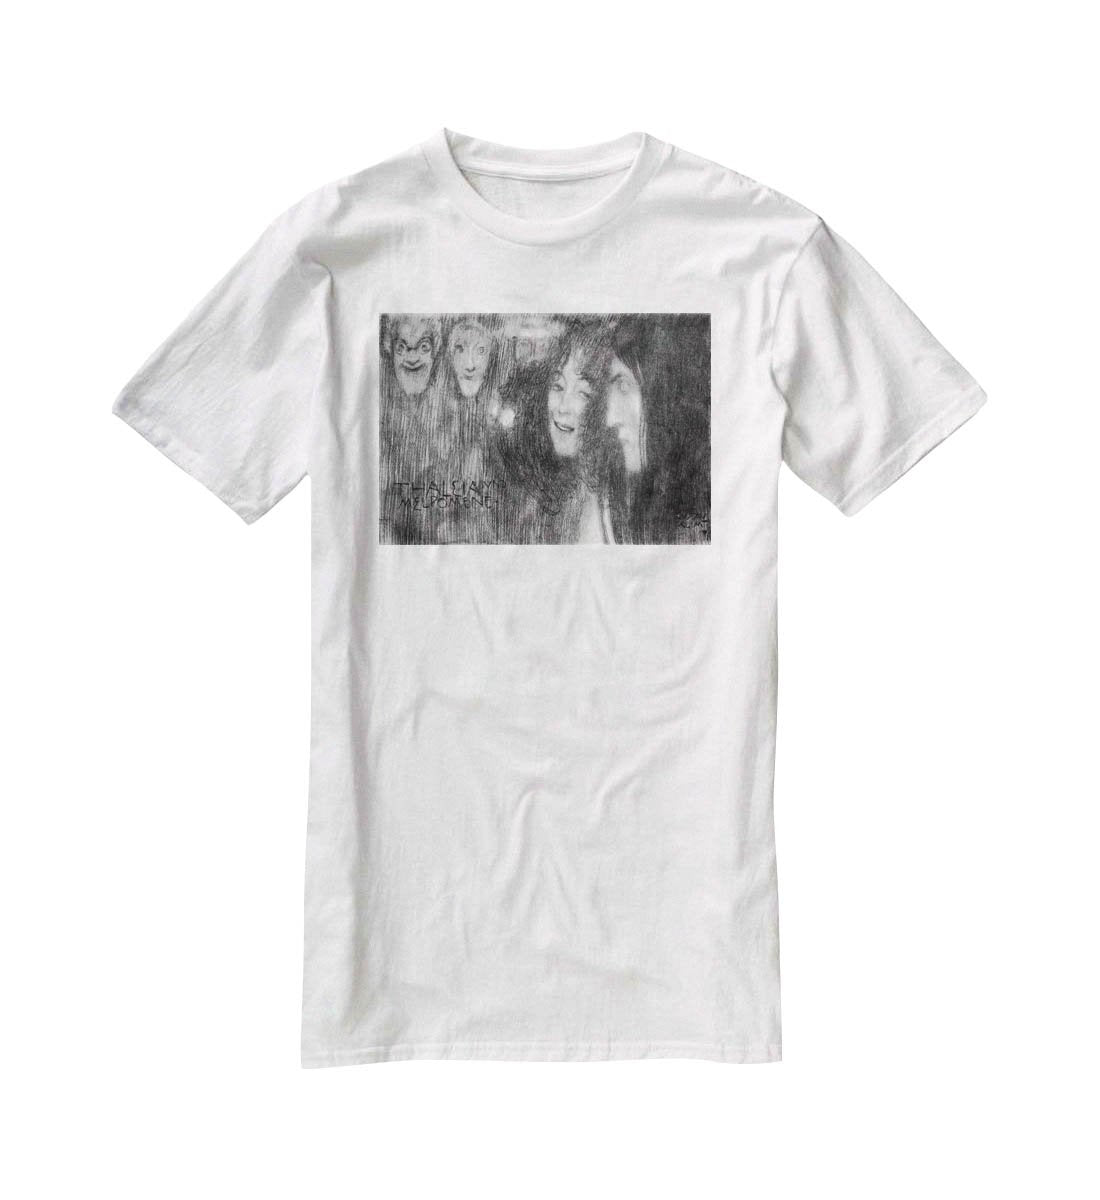 Two girls heads in profile and masks Thalia and Melpomene by Klimt T-Shirt - Canvas Art Rocks - 5